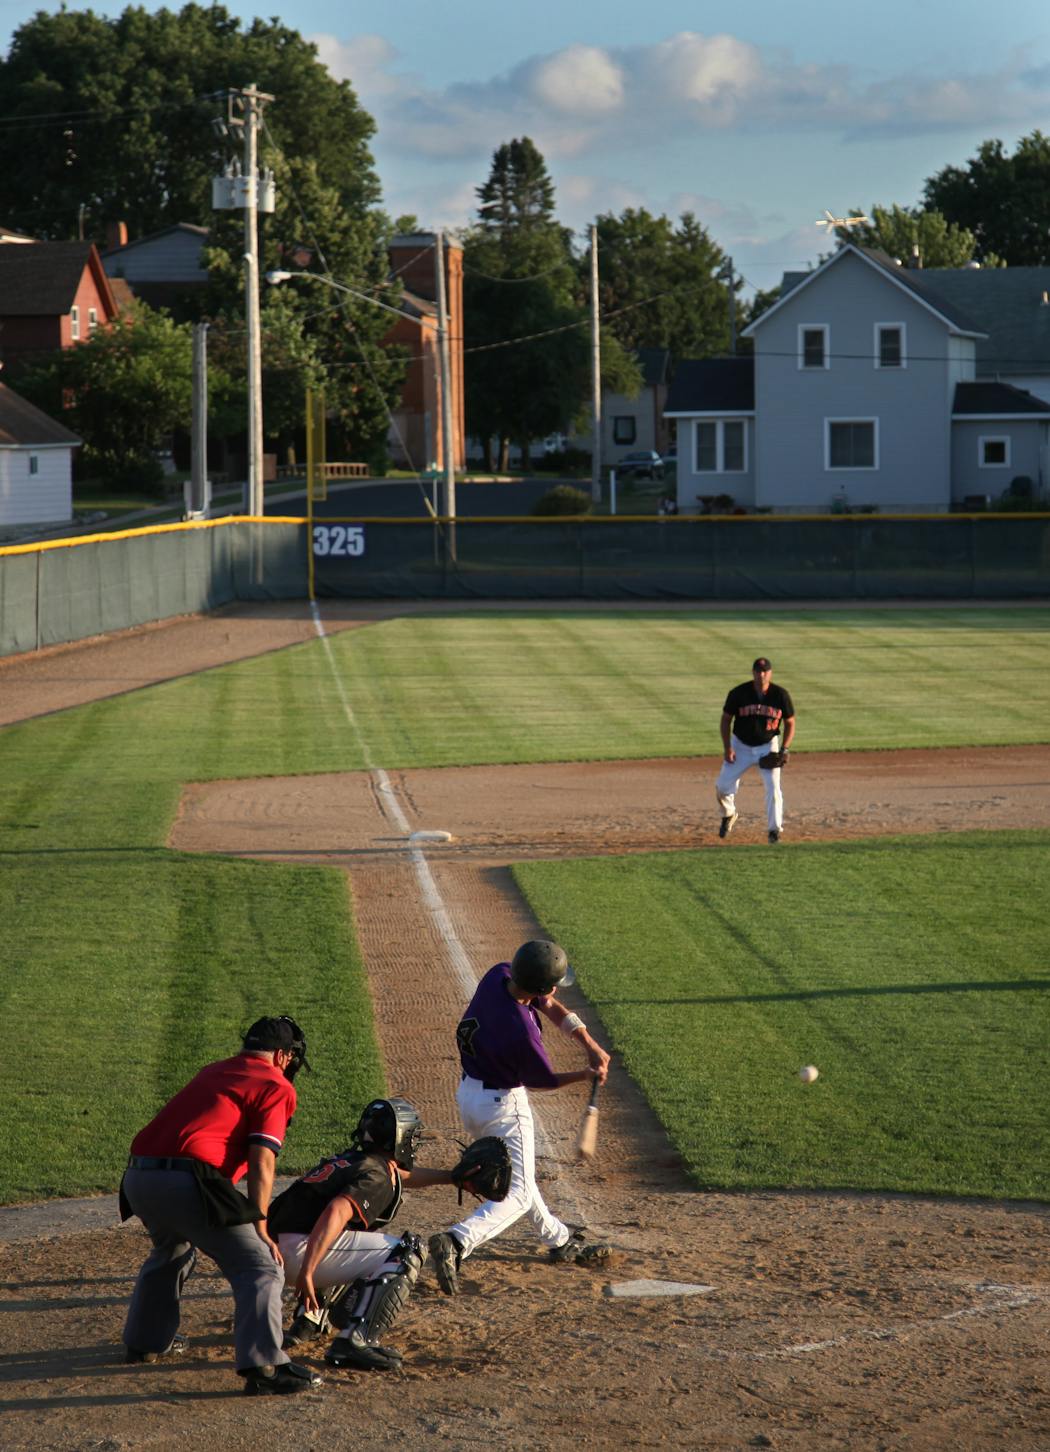 One thing that makes amateur baseball in Minnesota unique: the “radius” rule that players must live 30 miles “as the crow flies” their home ballpark.